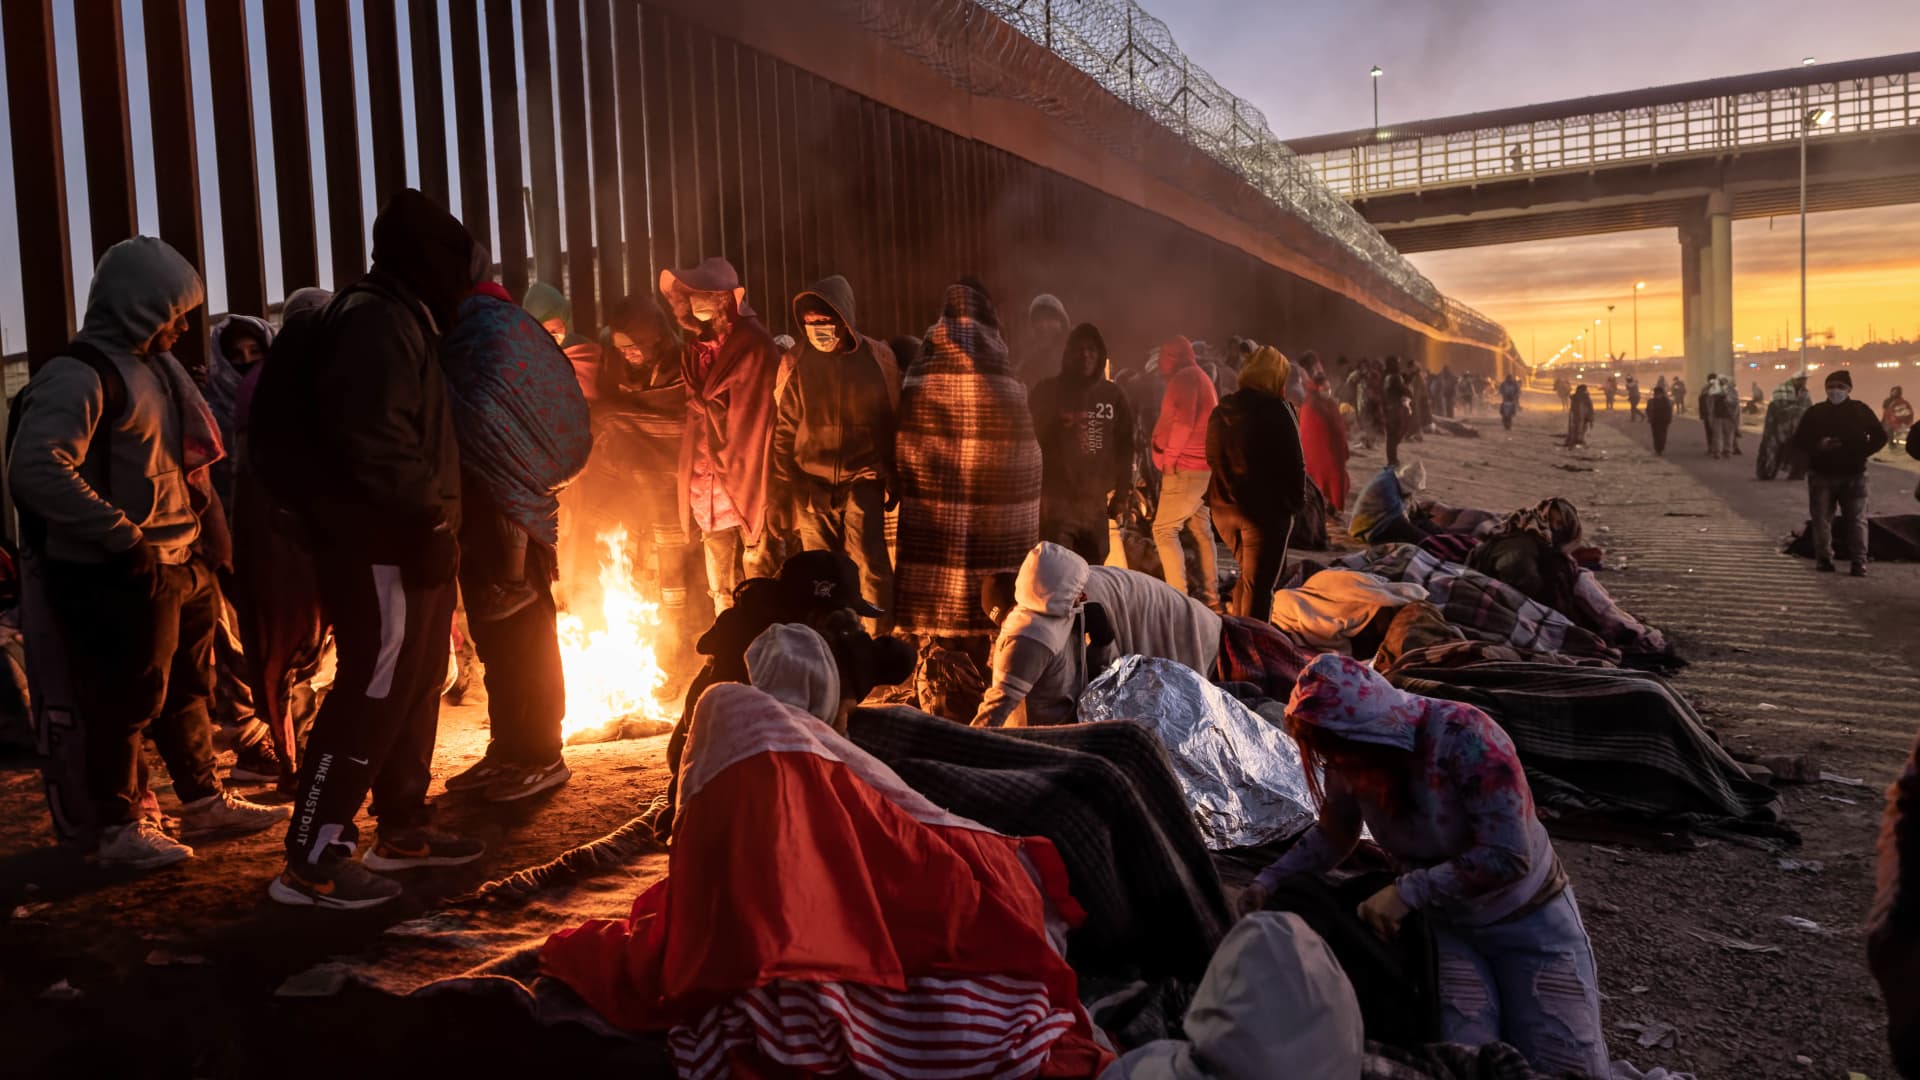 Immigrants keep warm by a fire at dawn after spending the night outside next to the U.S.-Mexico border fence on December 22, 2022 in El Paso, Texas.